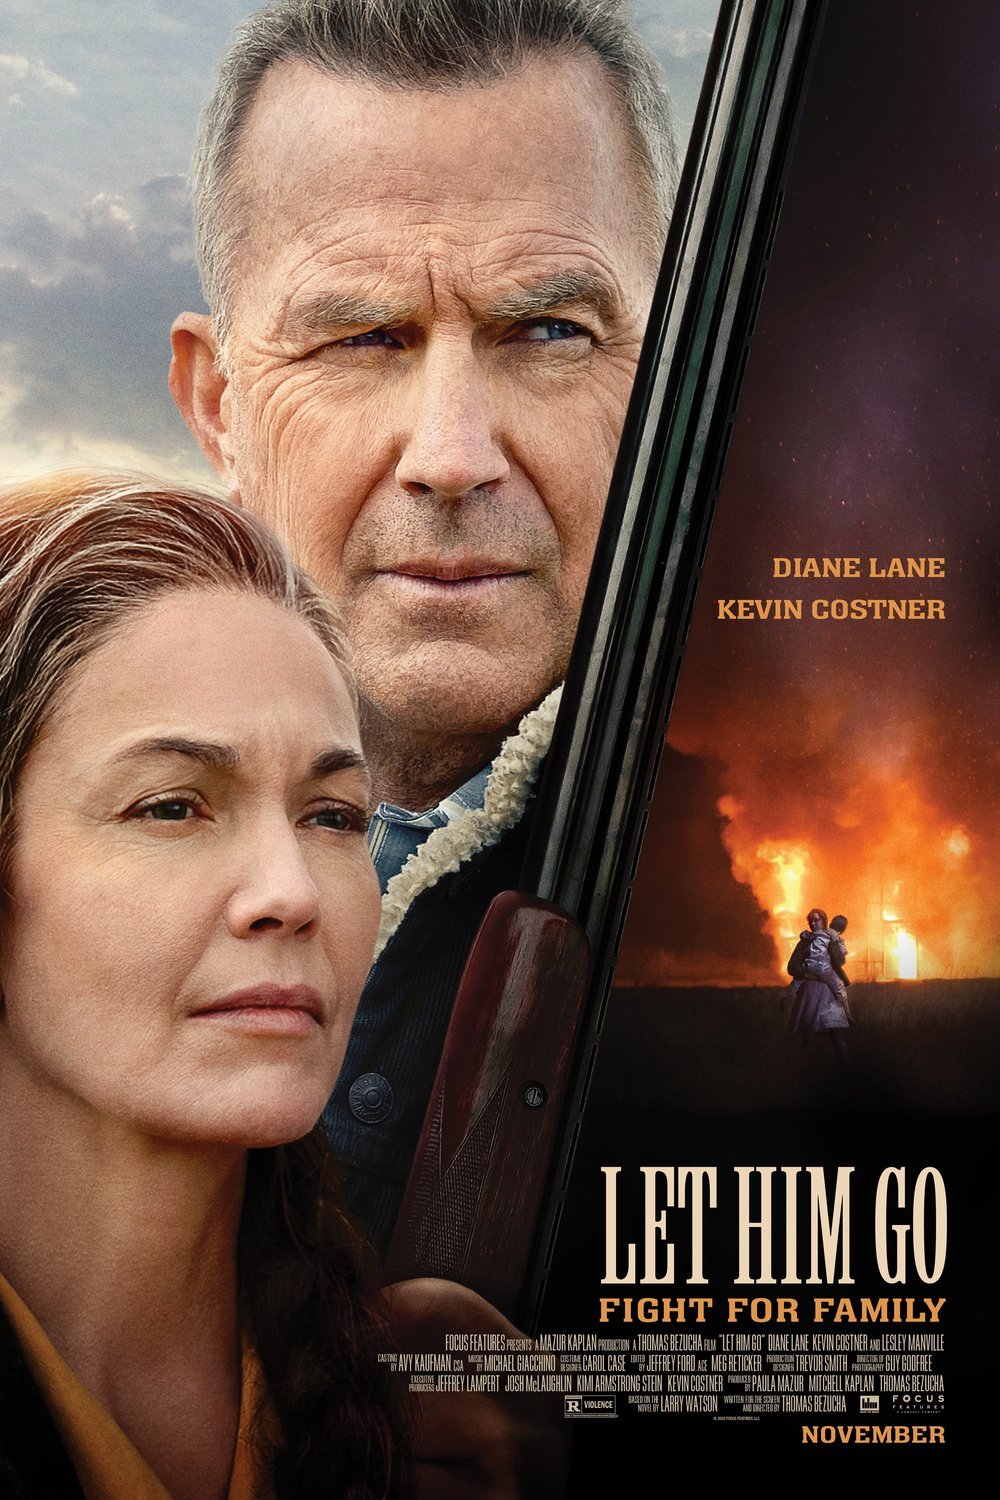 52 Top Pictures Let Him Go Movie 2020 - Let Him Go by Larry Watson - Book - Read Online